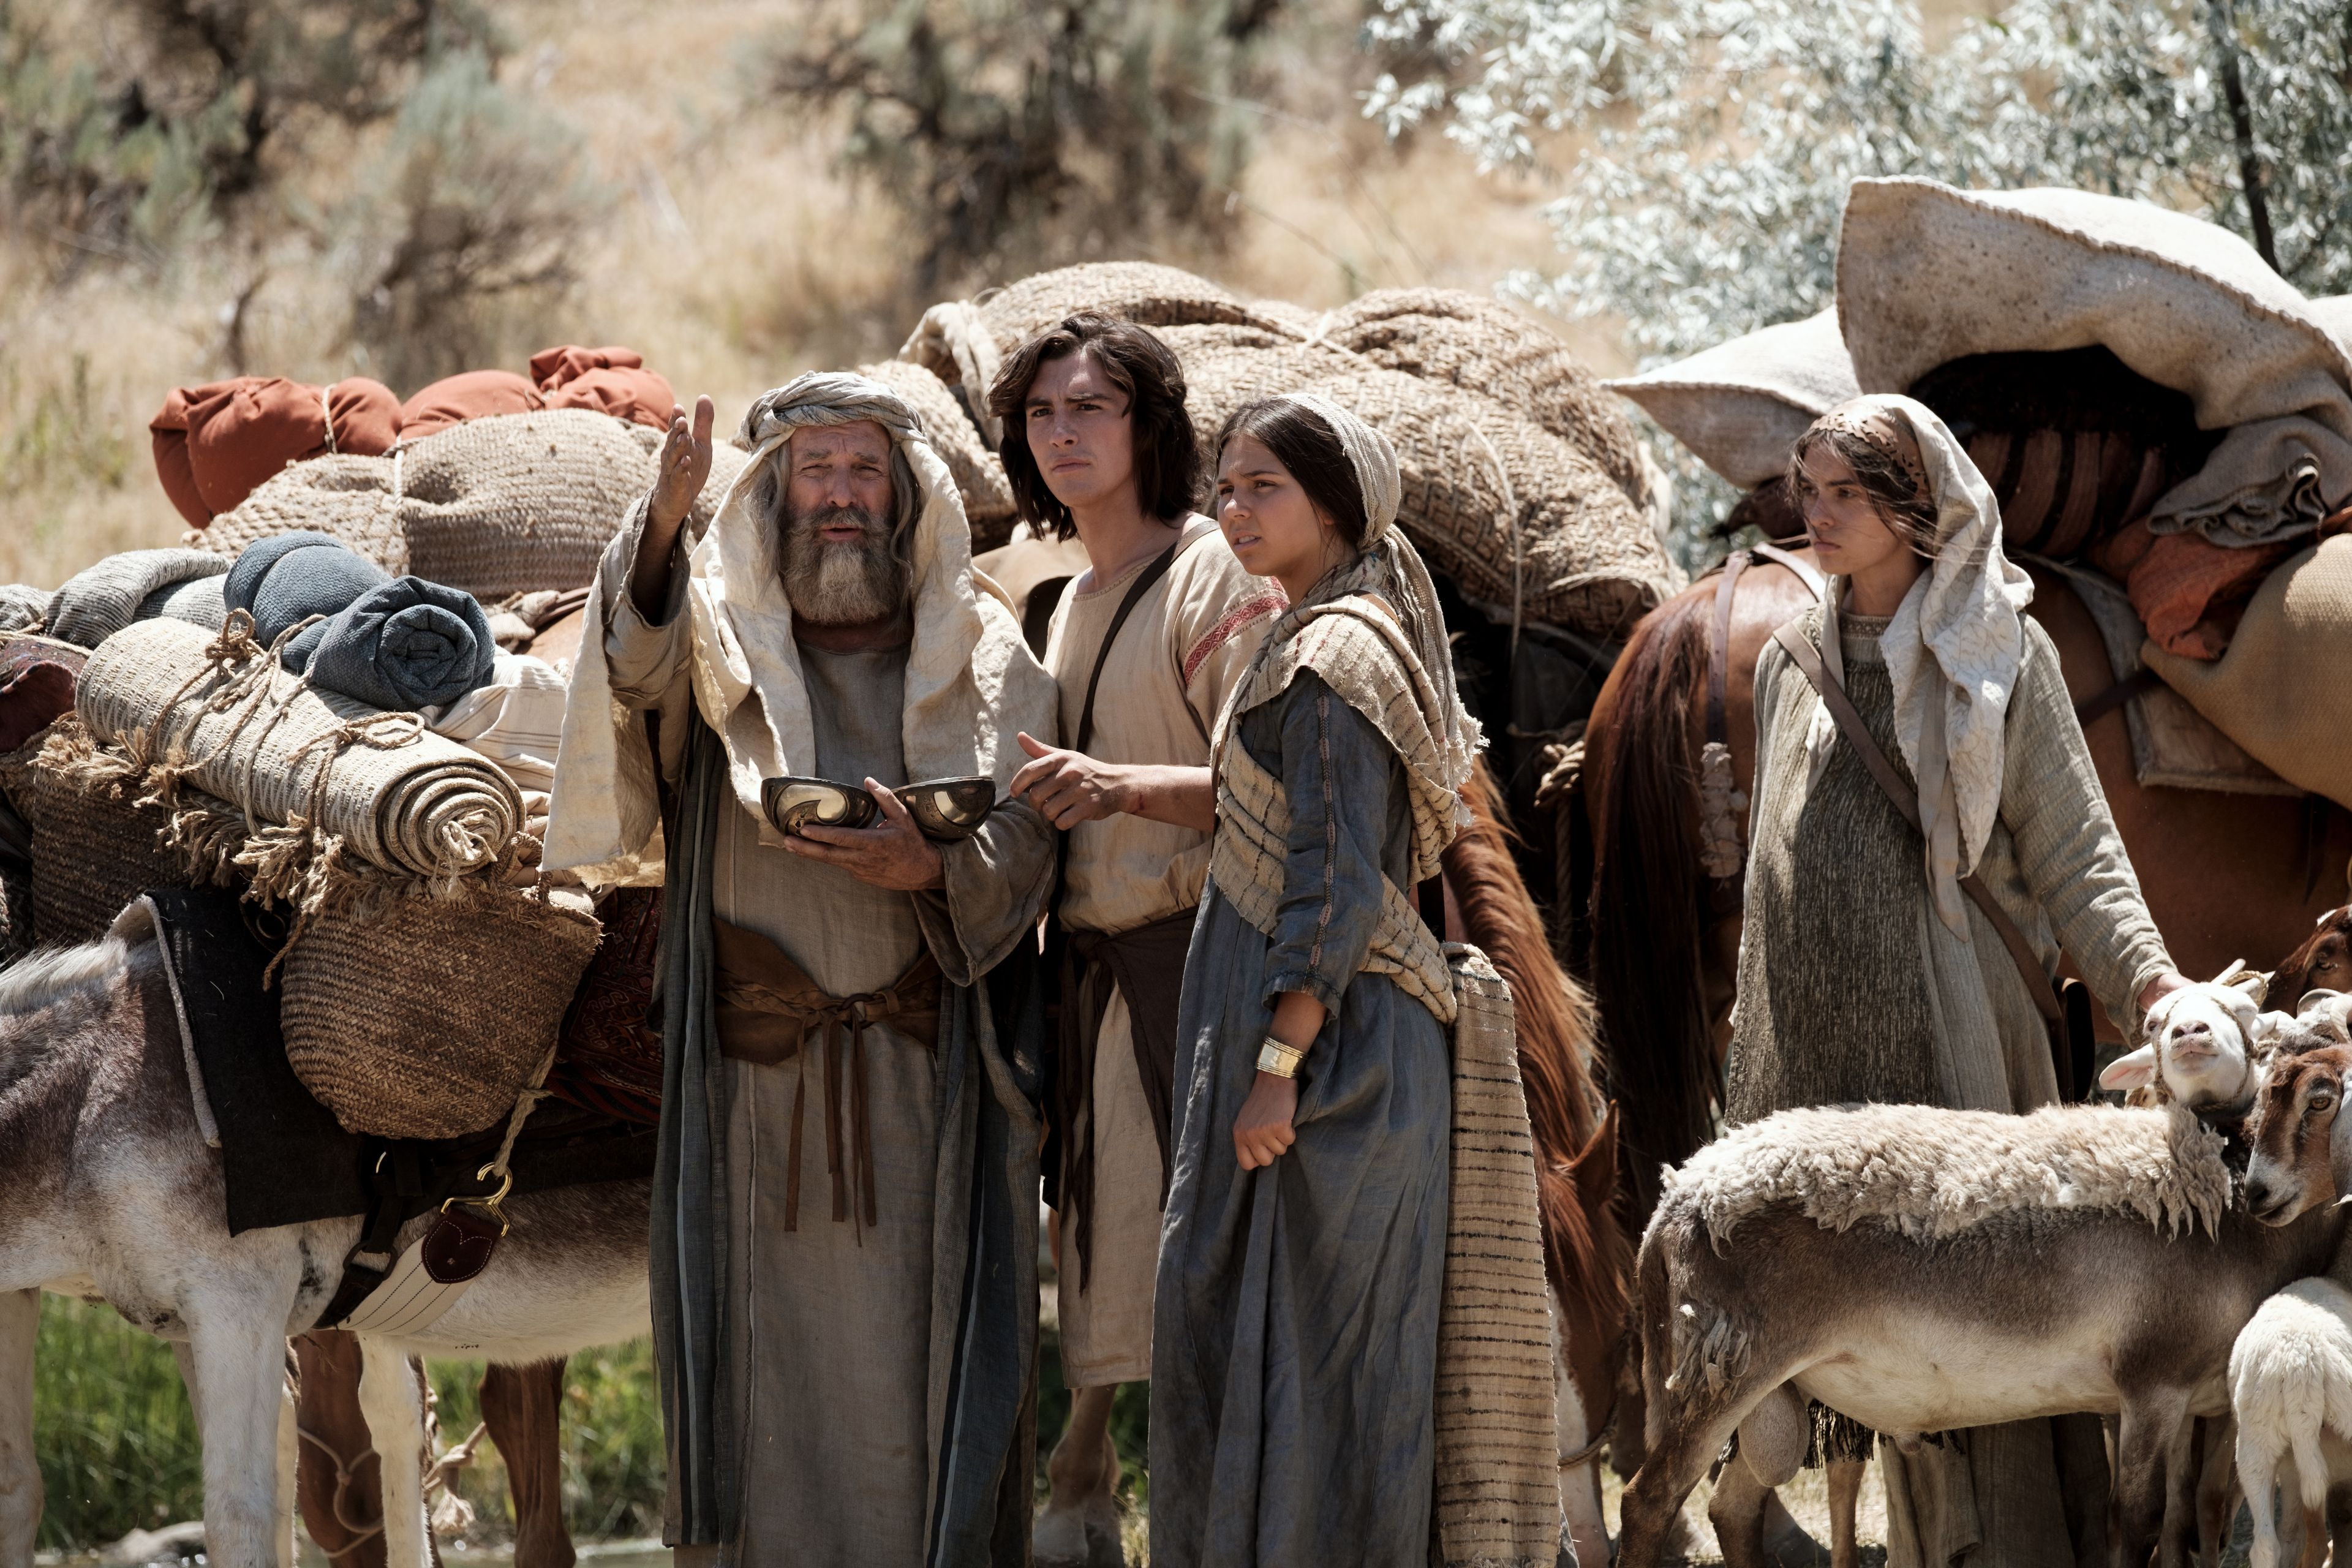 Lehi's family uses the Liahona for direction in the wilderness.